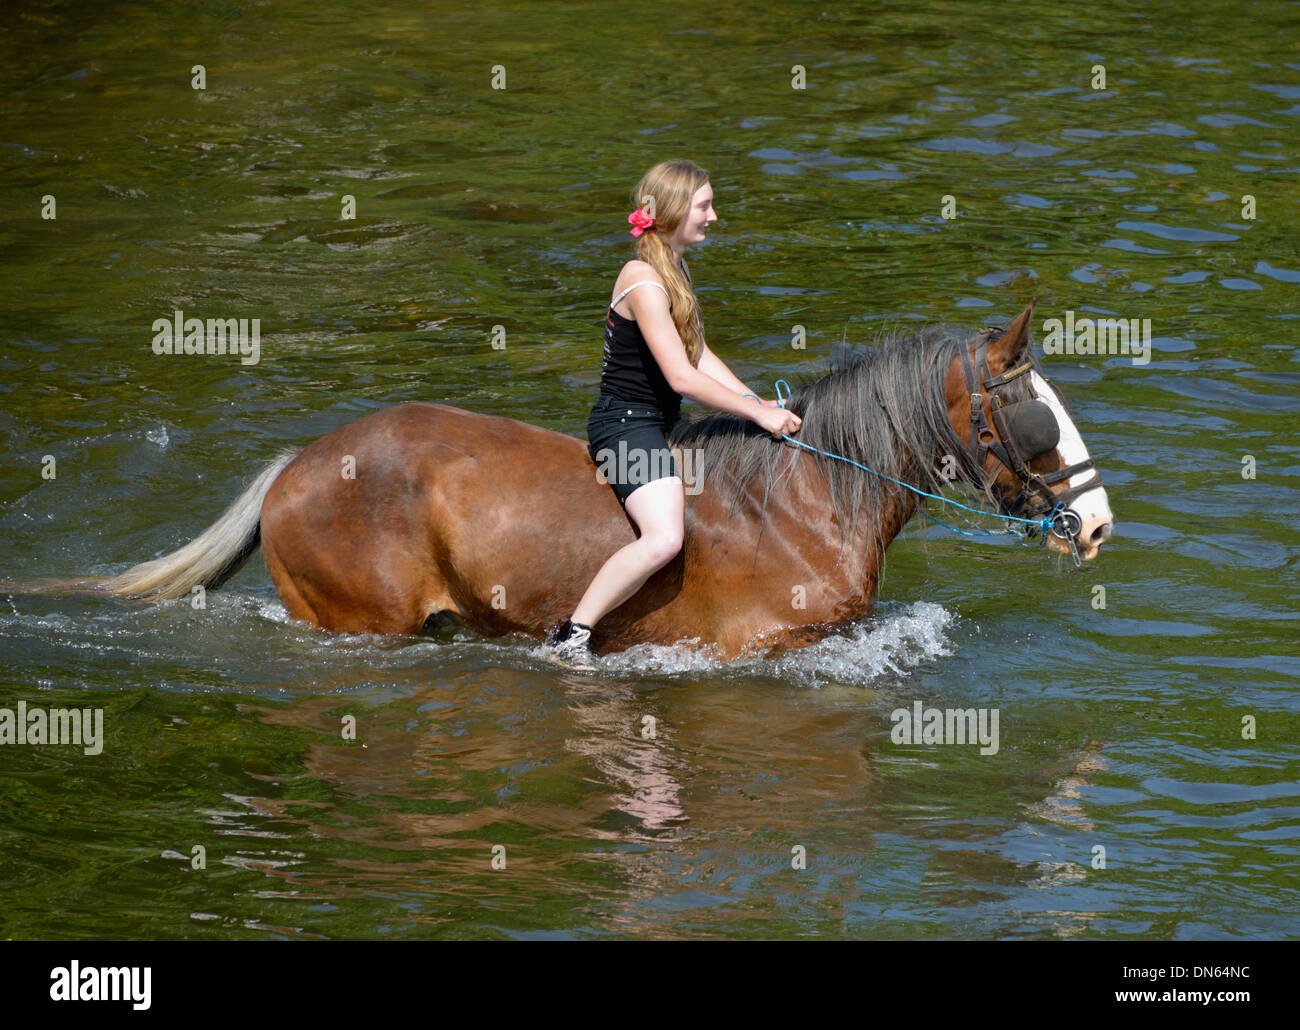 Gypsy traveller girl riding horse in River Eden. Appleby Horse Fair, Appleby-in-Westmorland, Cumbria, England, United Kingdom. Stock Photo